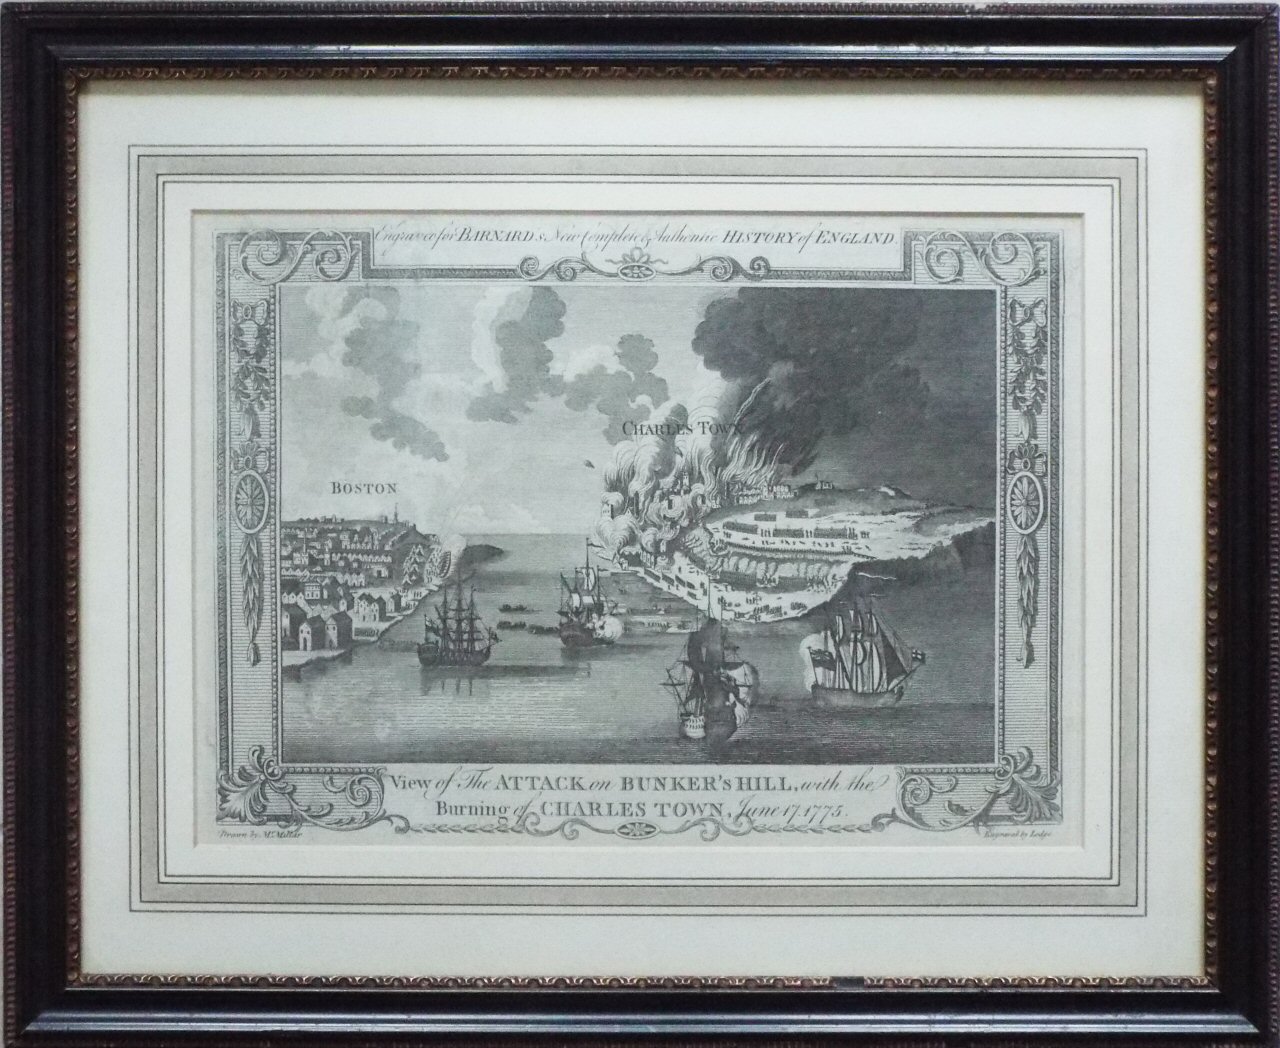 Print - View of the Attack on Bunker's Hill, with the Burning of Charles Town, June 17. 1775.Barnard's New Complete & Authentic History of England. - 